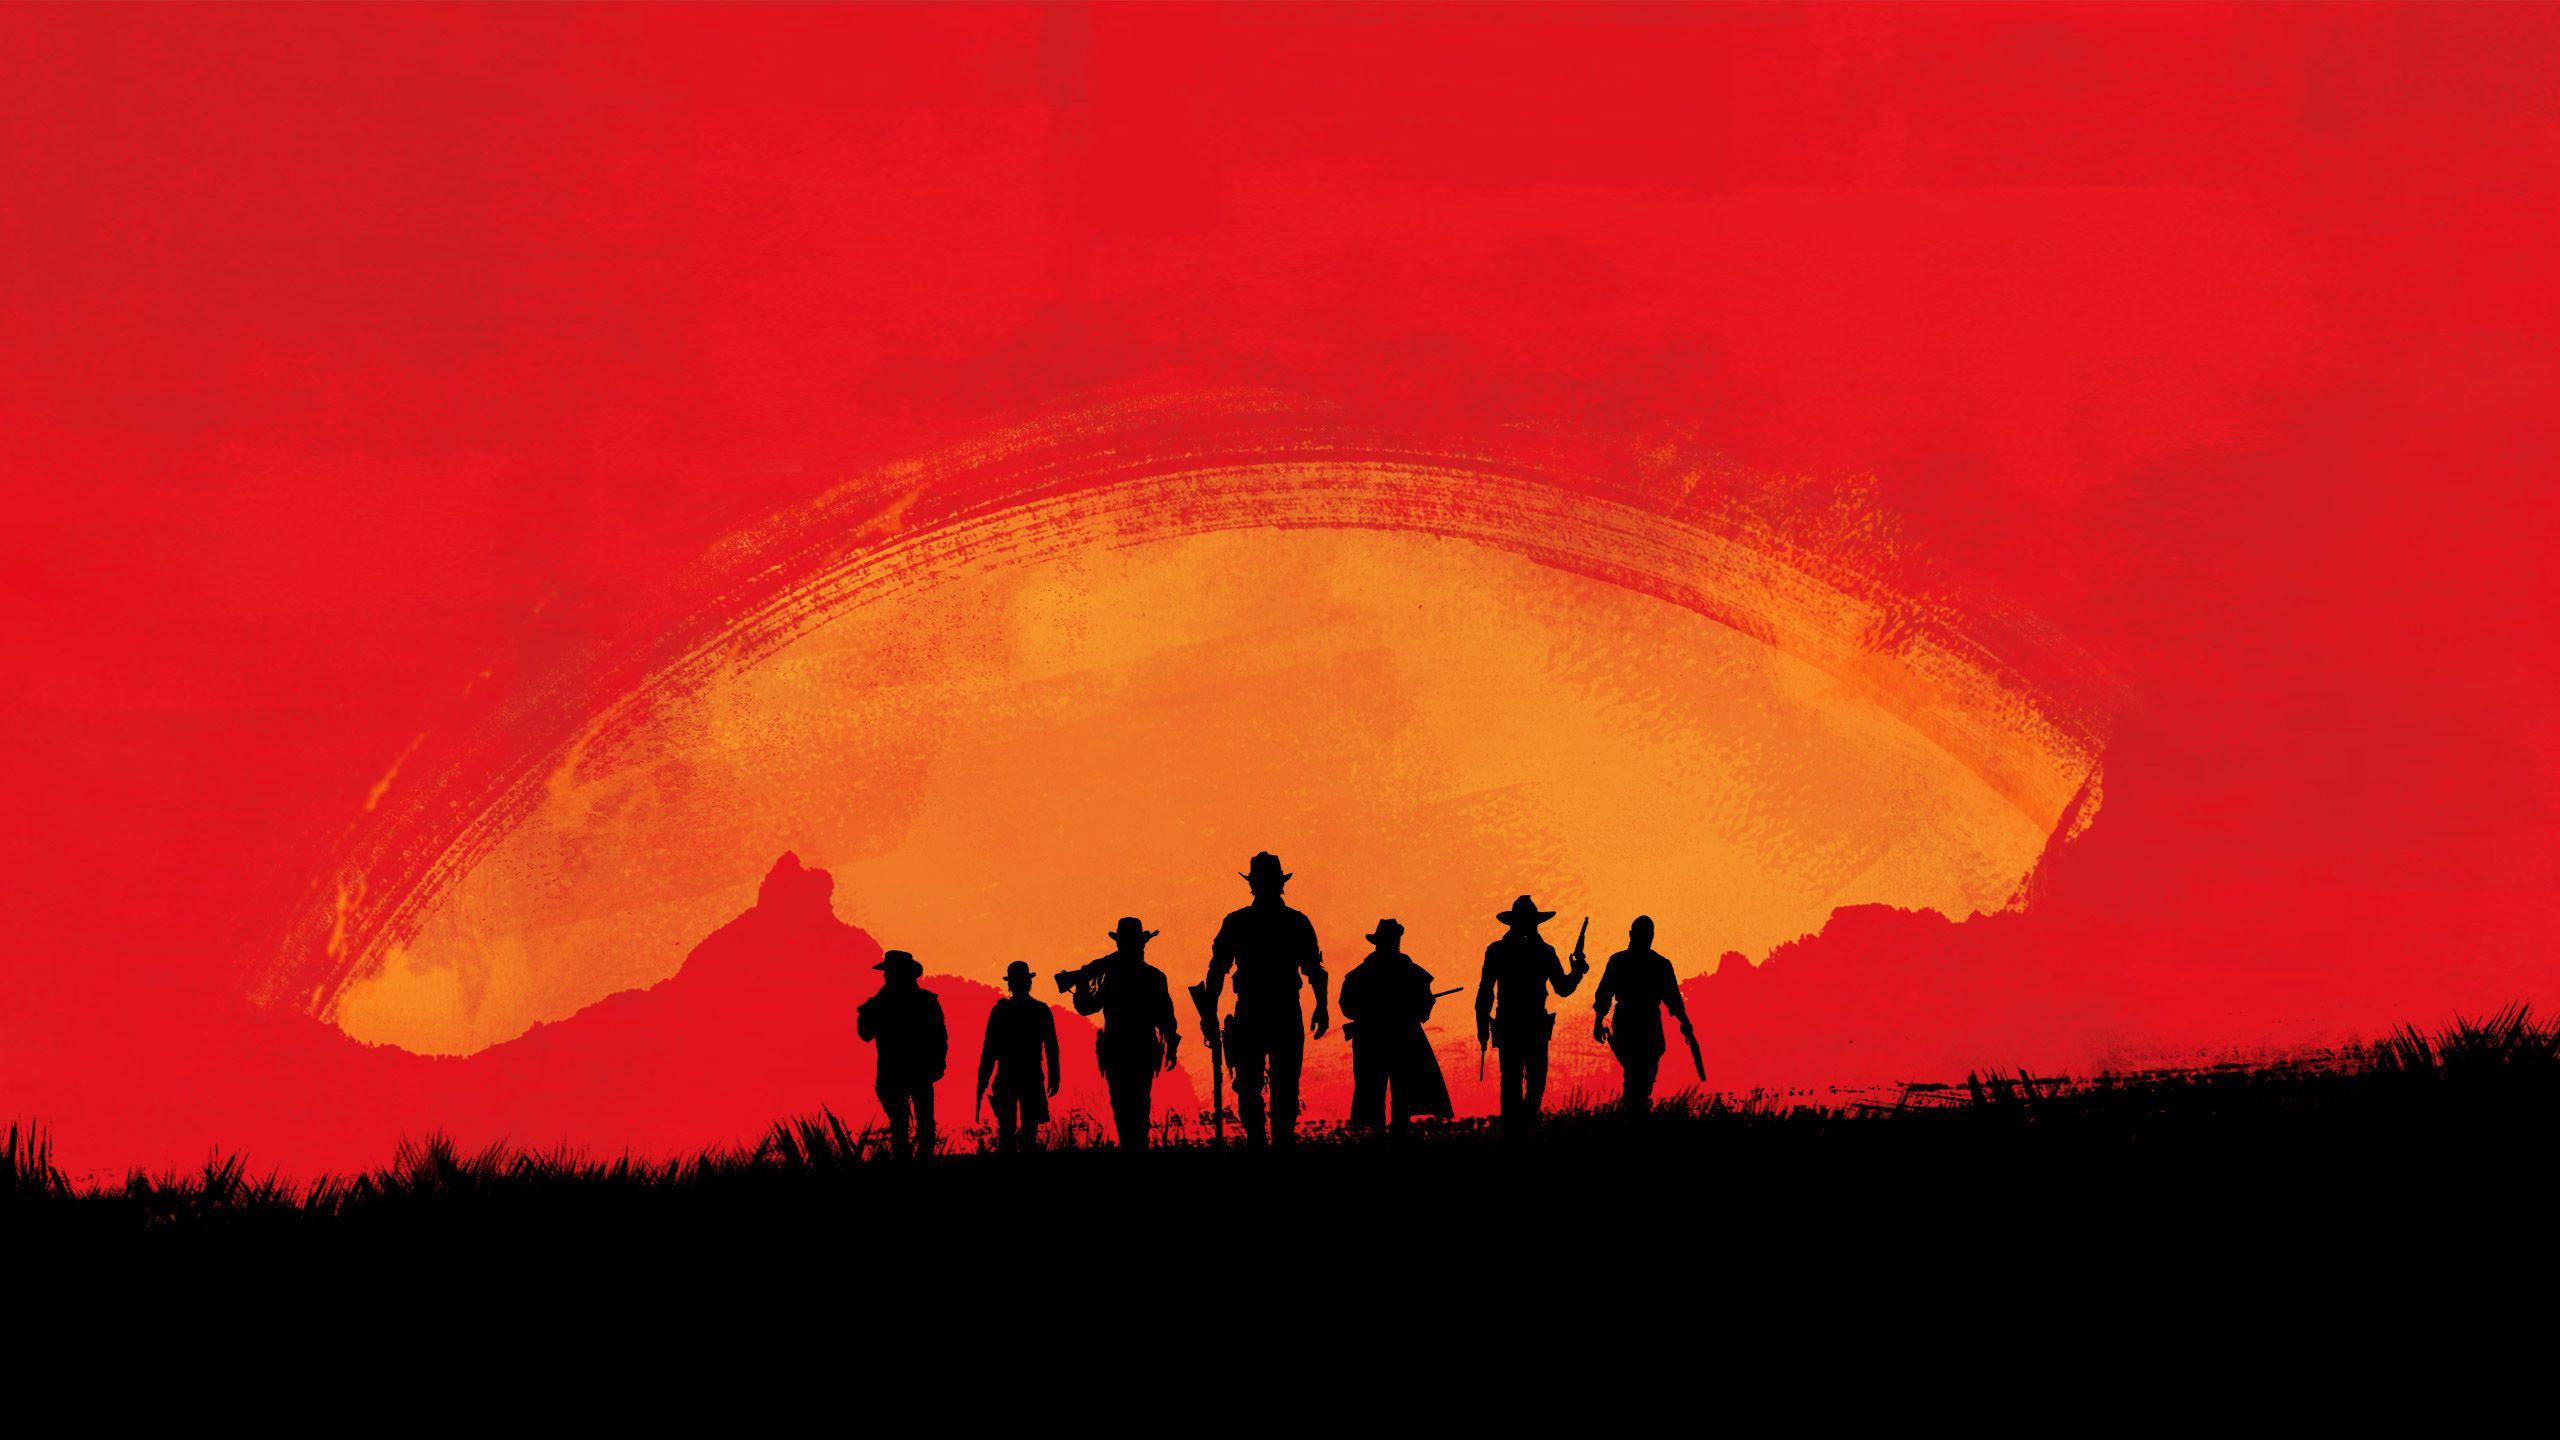 Red Dead Redemption 2 Wallpaper Free Red Dead